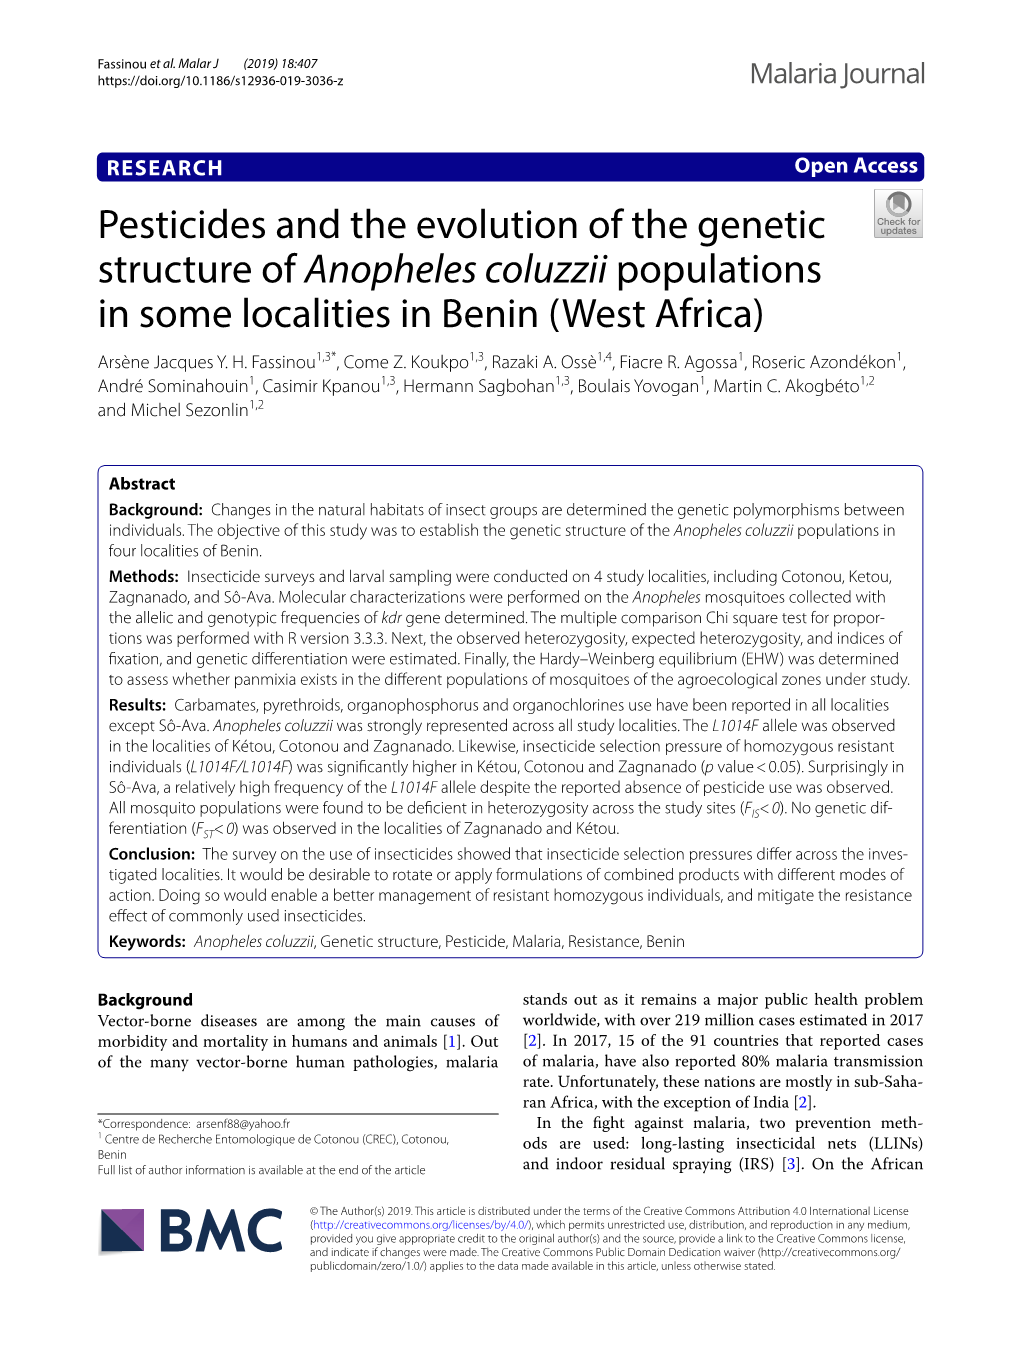 Pesticides and the Evolution of the Genetic Structure of Anopheles Coluzzii Populations in Some Localities in Benin (West Africa) Arsène Jacques Y